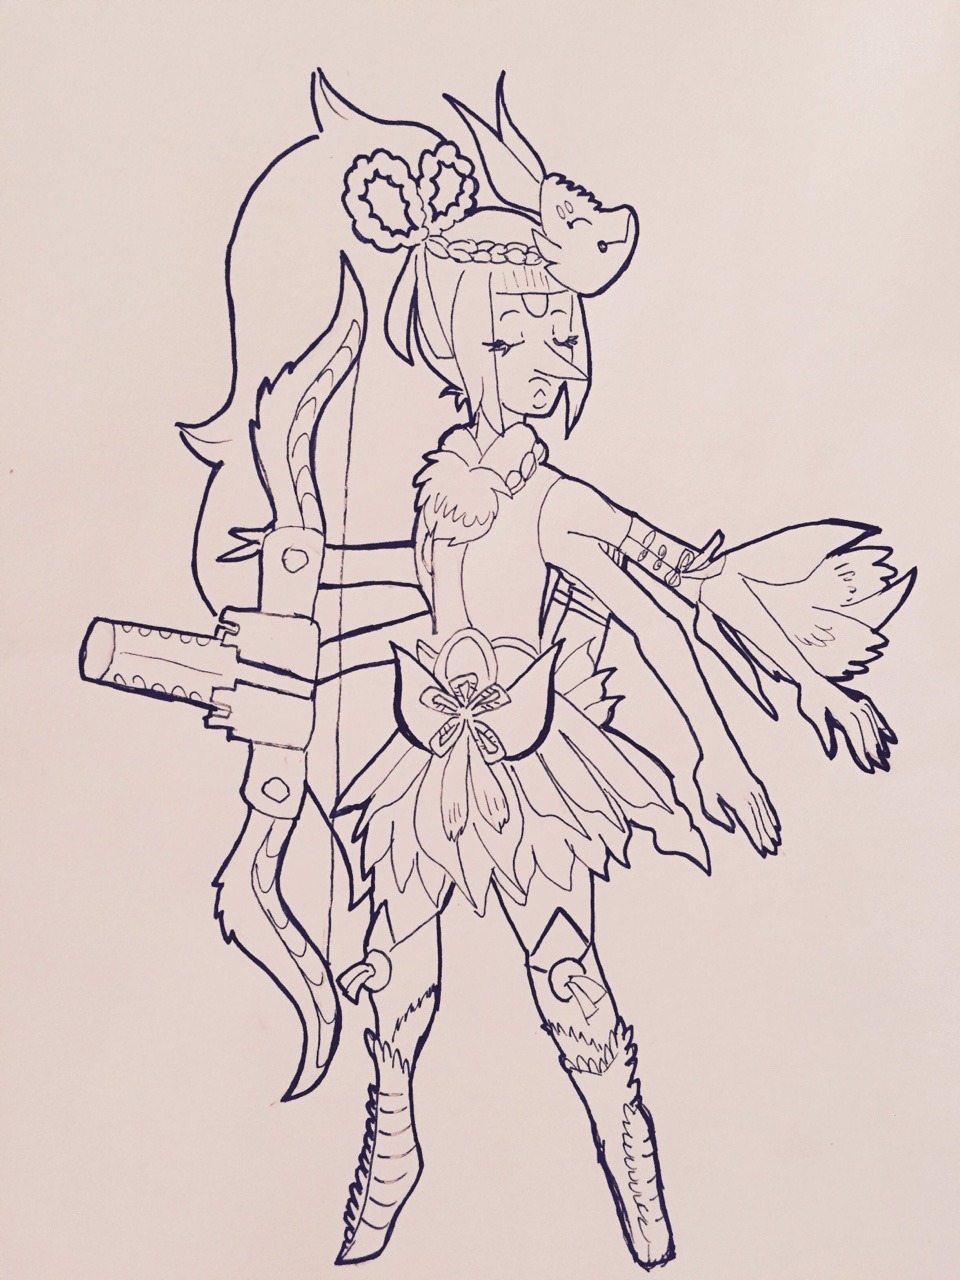 Inktober 24: Opal wearing the Mizutsune/Tamamitsune female gunner set from Monster Hunter Generations and using the Teostra bow.
I started really late, so the inking was rushed and there are a lot of...